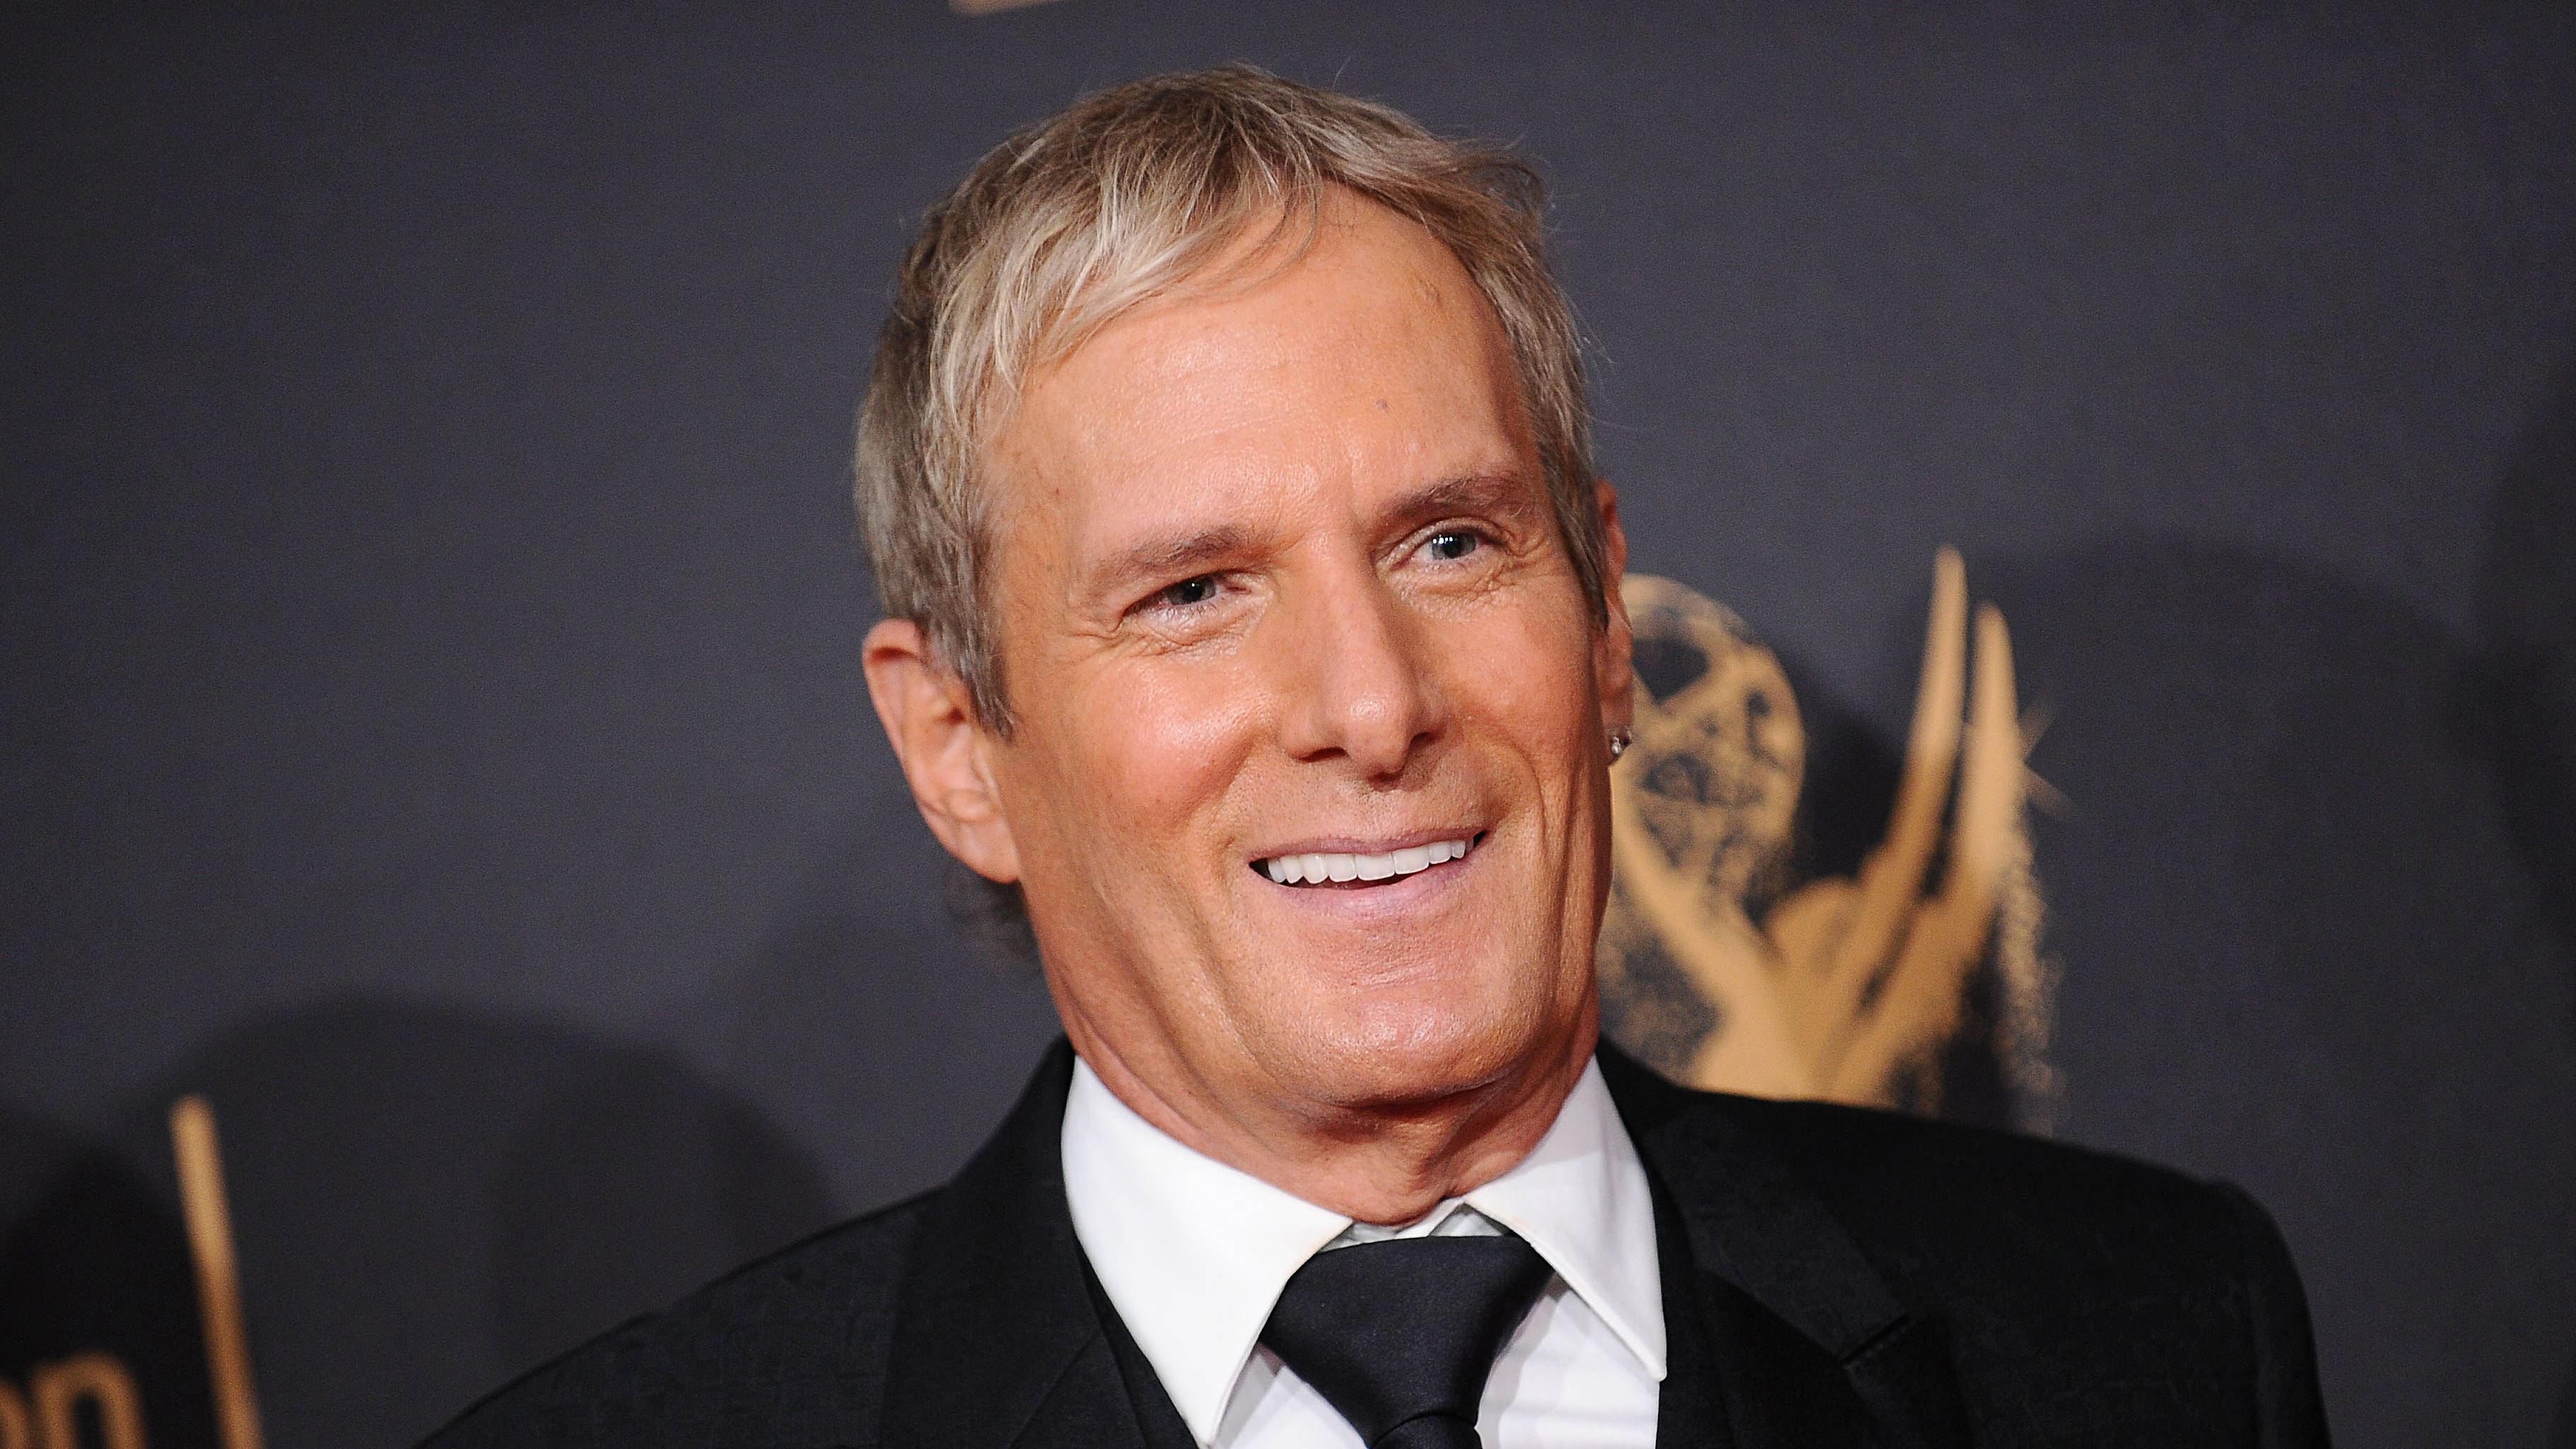 How many grandchildren does michael bolton have?